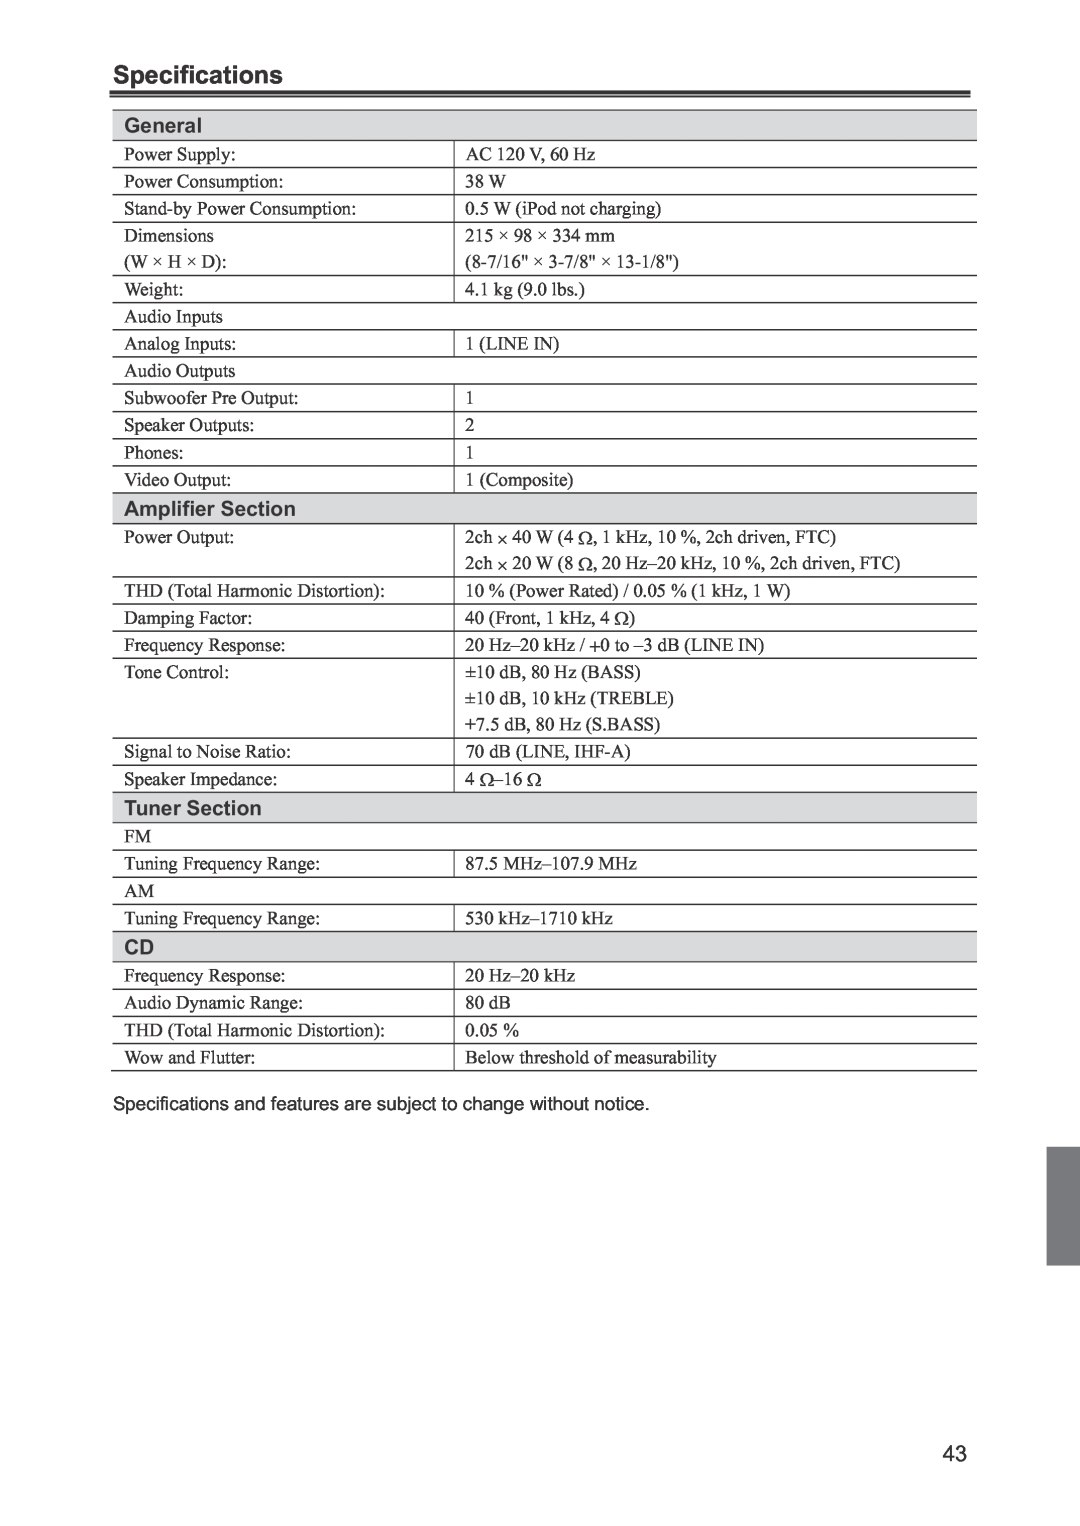 Onkyo CR-445 instruction manual Specifications, General, Amplifier Section, Tuner Section 